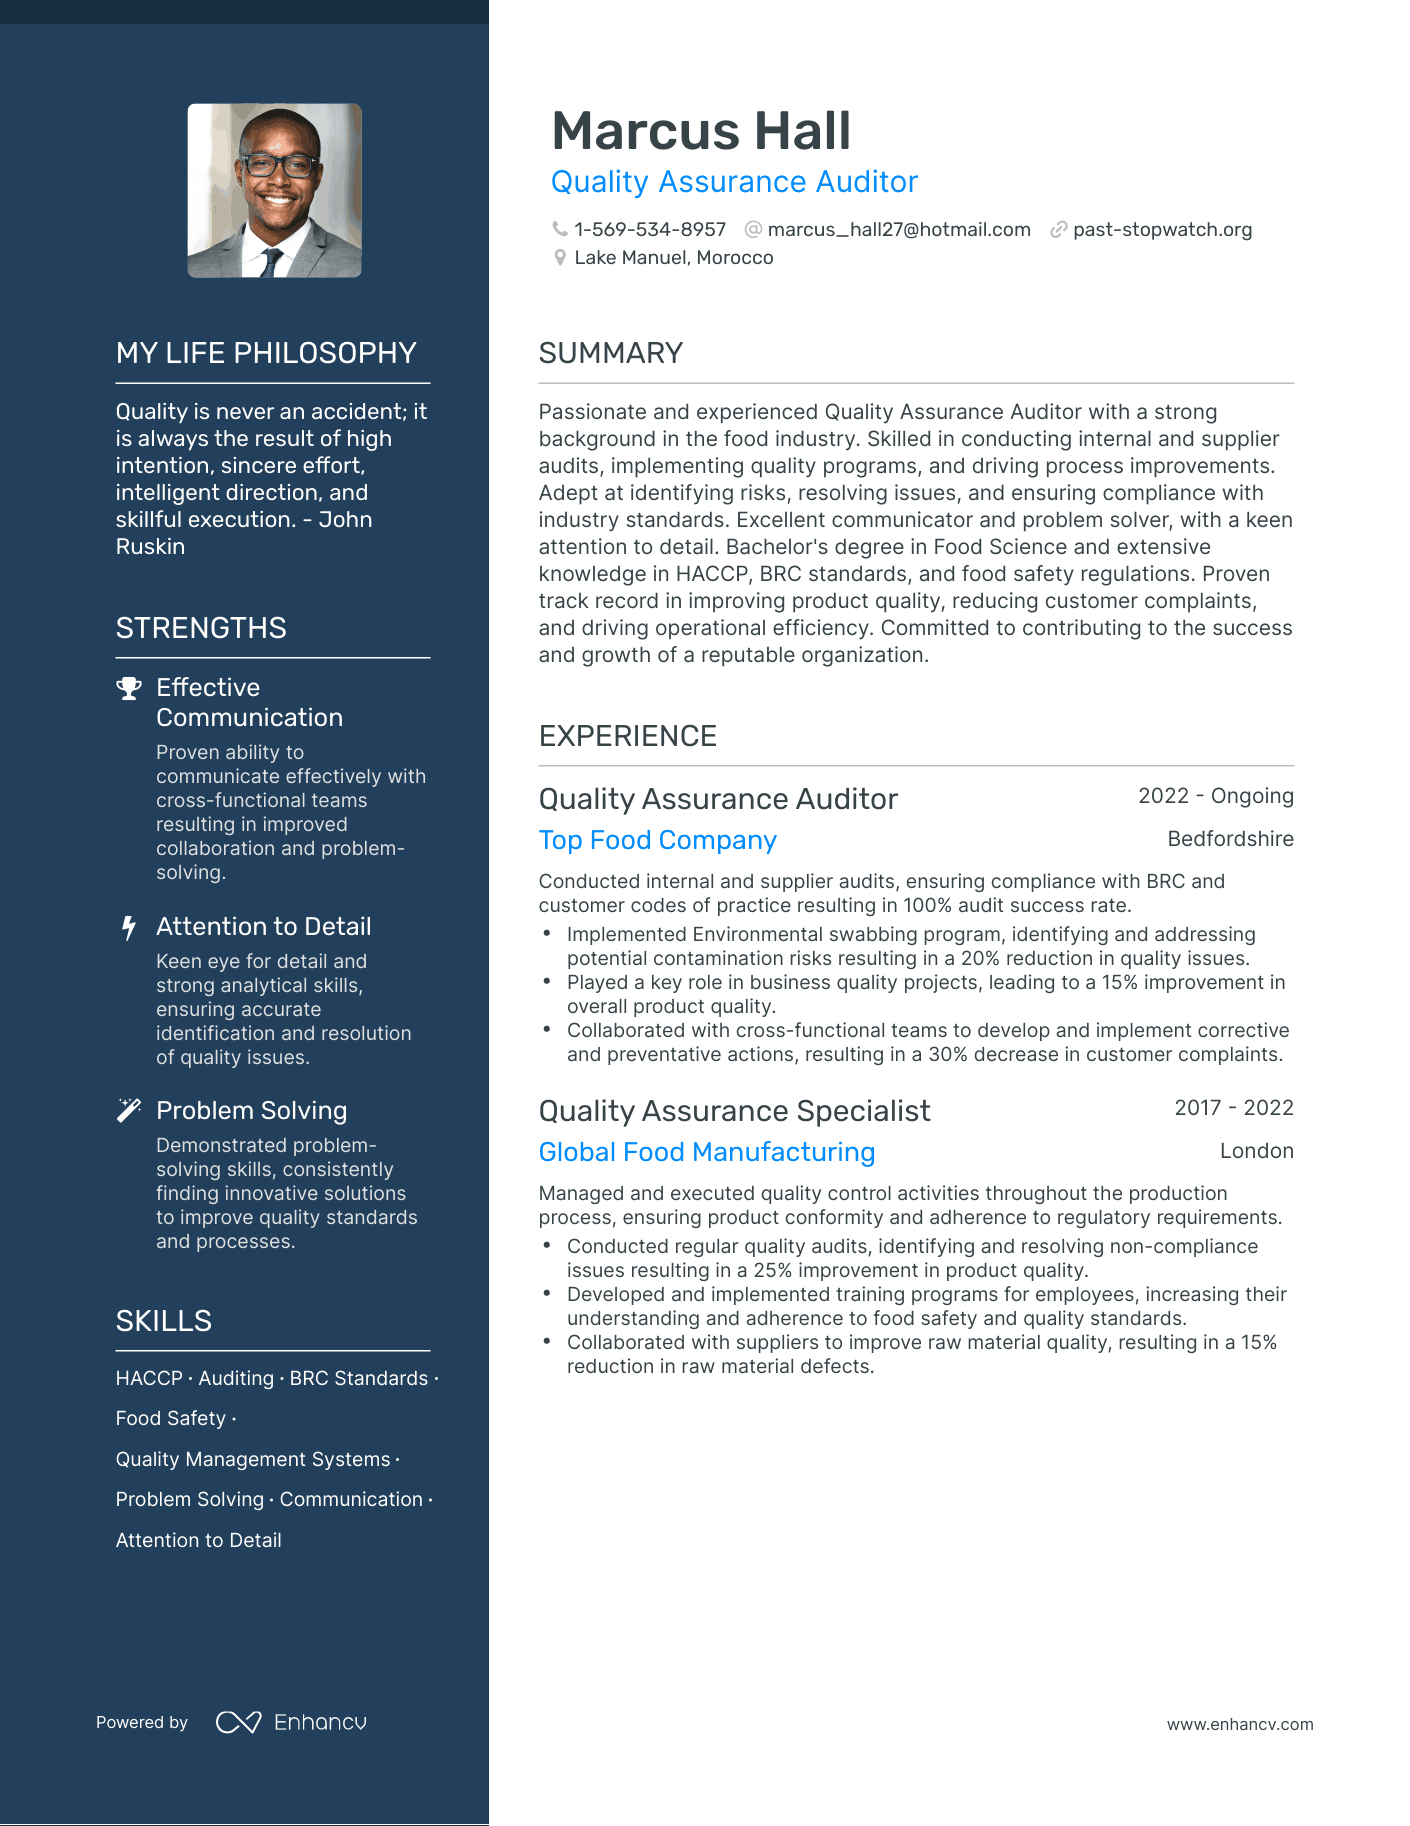 Quality Assurance Auditor resume example